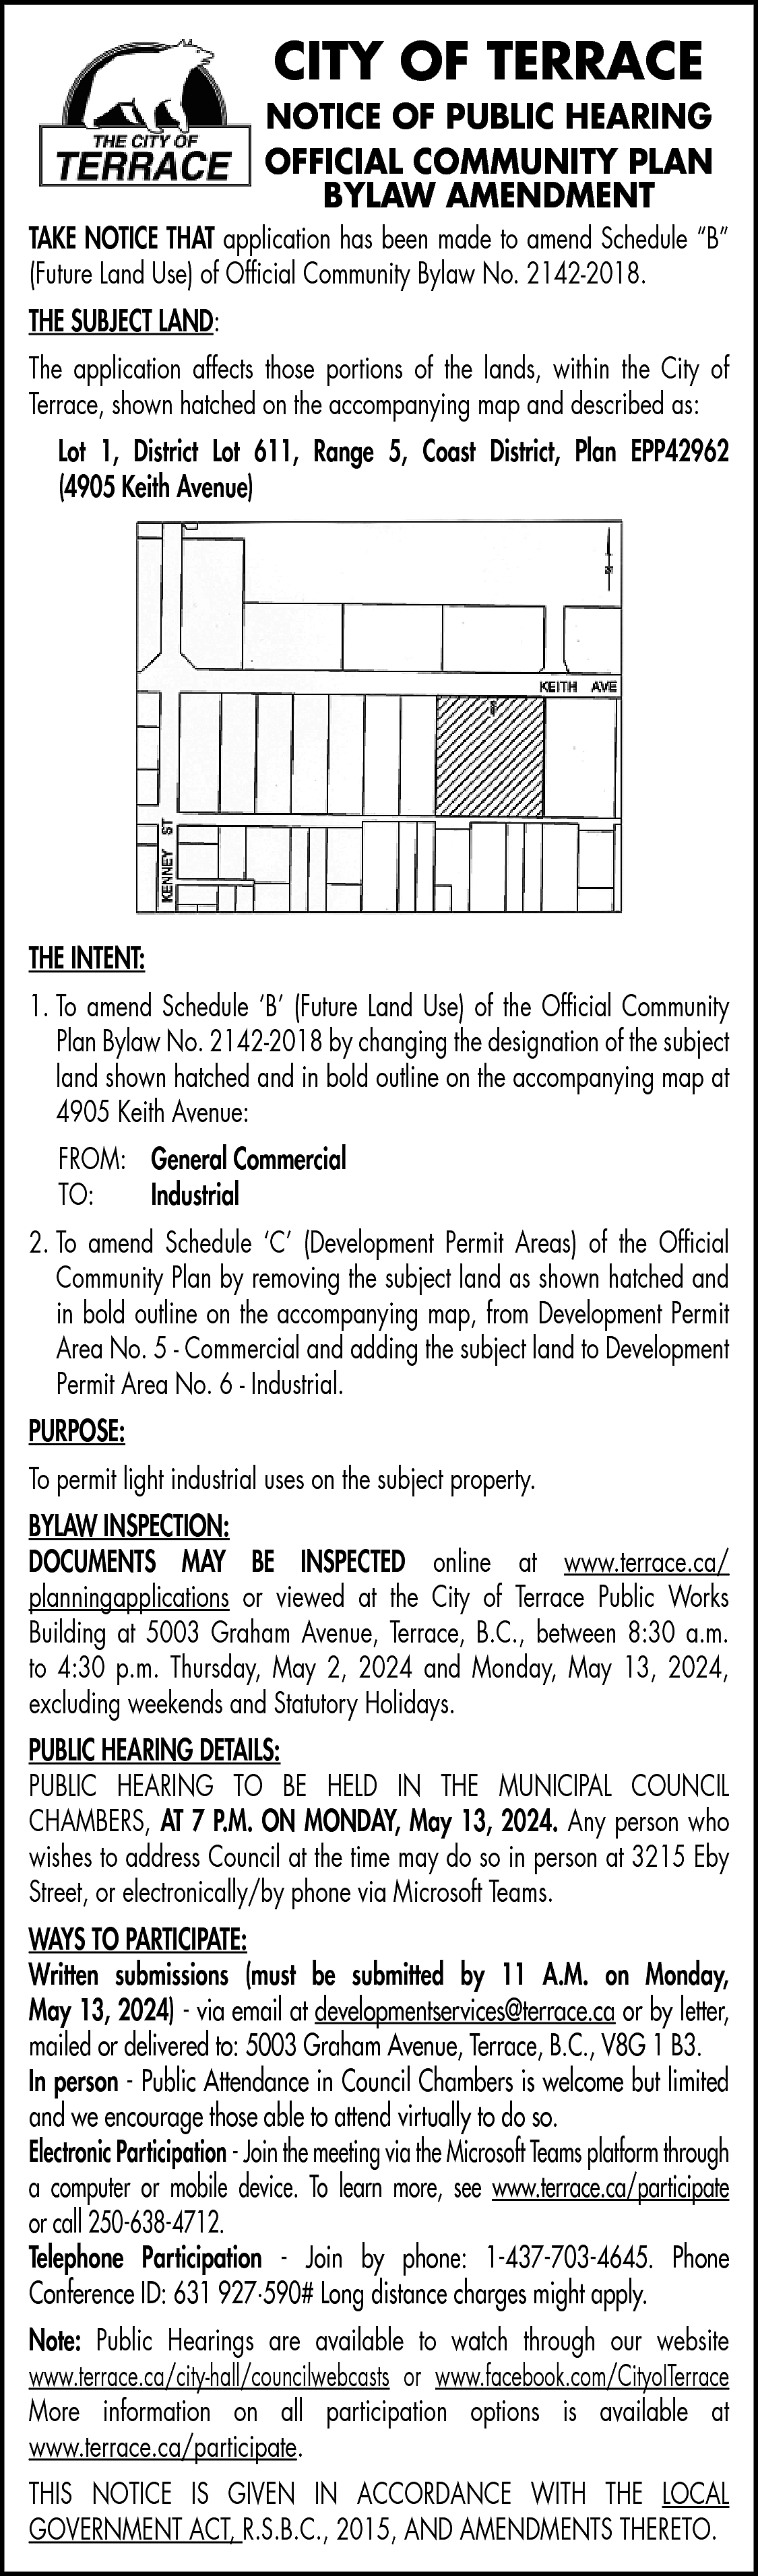 CITY OF TERRACE <br> <br>NOTICE  CITY OF TERRACE    NOTICE OF PUBLIC HEARING  OFFICIAL COMMUNITY PLAN  BYLAW AMENDMENT  TAKE NOTICE THAT application has been made to amend Schedule “B”  (Future Land Use) of Official Community Bylaw No. 2142-2018.  THE SUBJECT LAND:  The application affects those portions of the lands, within the City of  Terrace, shown hatched on the accompanying map and described as:  Lot 1, District Lot 611, Range 5, Coast District, Plan EPP42962  (4905 Keith Avenue)    THE INTENT:  1. To amend Schedule ‘B’ (Future Land Use) of the Official Community  Plan Bylaw No. 2142-2018 by changing the designation of the subject  land shown hatched and in bold outline on the accompanying map at  4905 Keith Avenue:  FROM: General Commercial  TO:  Industrial  2. To amend Schedule ‘C’ (Development Permit Areas) of the Official  Community Plan by removing the subject land as shown hatched and  in bold outline on the accompanying map, from Development Permit  Area No. 5 - Commercial and adding the subject land to Development  Permit Area No. 6 - Industrial.  PURPOSE:  To permit light industrial uses on the subject property.  BYLAW INSPECTION:  DOCUMENTS MAY BE INSPECTED online at www.terrace.ca/  planningapplications or viewed at the City of Terrace Public Works  Building at 5003 Graham Avenue, Terrace, B.C., between 8:30 a.m.  to 4:30 p.m. Thursday, May 2, 2024 and Monday, May 13, 2024,  excluding weekends and Statutory Holidays.  PUBLIC HEARING DETAILS:  PUBLIC HEARING TO BE HELD IN THE MUNICIPAL COUNCIL  CHAMBERS, AT 7 P.M. ON MONDAY, May 13, 2024. Any person who  wishes to address Council at the time may do so in person at 3215 Eby  Street, or electronically/by phone via Microsoft Teams.  WAYS TO PARTICIPATE:  Written submissions (must be submitted by 11 A.M. on Monday,  May 13, 2024) - via email at developmentservices@terrace.ca or by letter,  mailed or delivered to: 5003 Graham Avenue, Terrace, B.C., V8G 1 B3.  In person - Public Attendance in Council Chambers is welcome but limited  and we encourage those able to attend virtually to do so.  Electronic Participation - Join the meeting via the Microsoft Teams platform through  a computer or mobile device. To learn more, see www.terrace.ca/participate  or call 250-638-4712.  Telephone Participation - Join by phone: 1-437-703-4645. Phone  Conference ID: 631 927·590# Long distance charges might apply.  Note: Public Hearings are available to watch through our website  www.terrace.ca/city-hall/councilwebcasts or www.facebook.com/CityoITerrace  More information on all participation options is available at  www.terrace.ca/participate.  THIS NOTICE IS GIVEN IN ACCORDANCE WITH THE LOCAL  GOVERNMENT ACT, R.S.B.C., 2015, AND AMENDMENTS THERETO.    